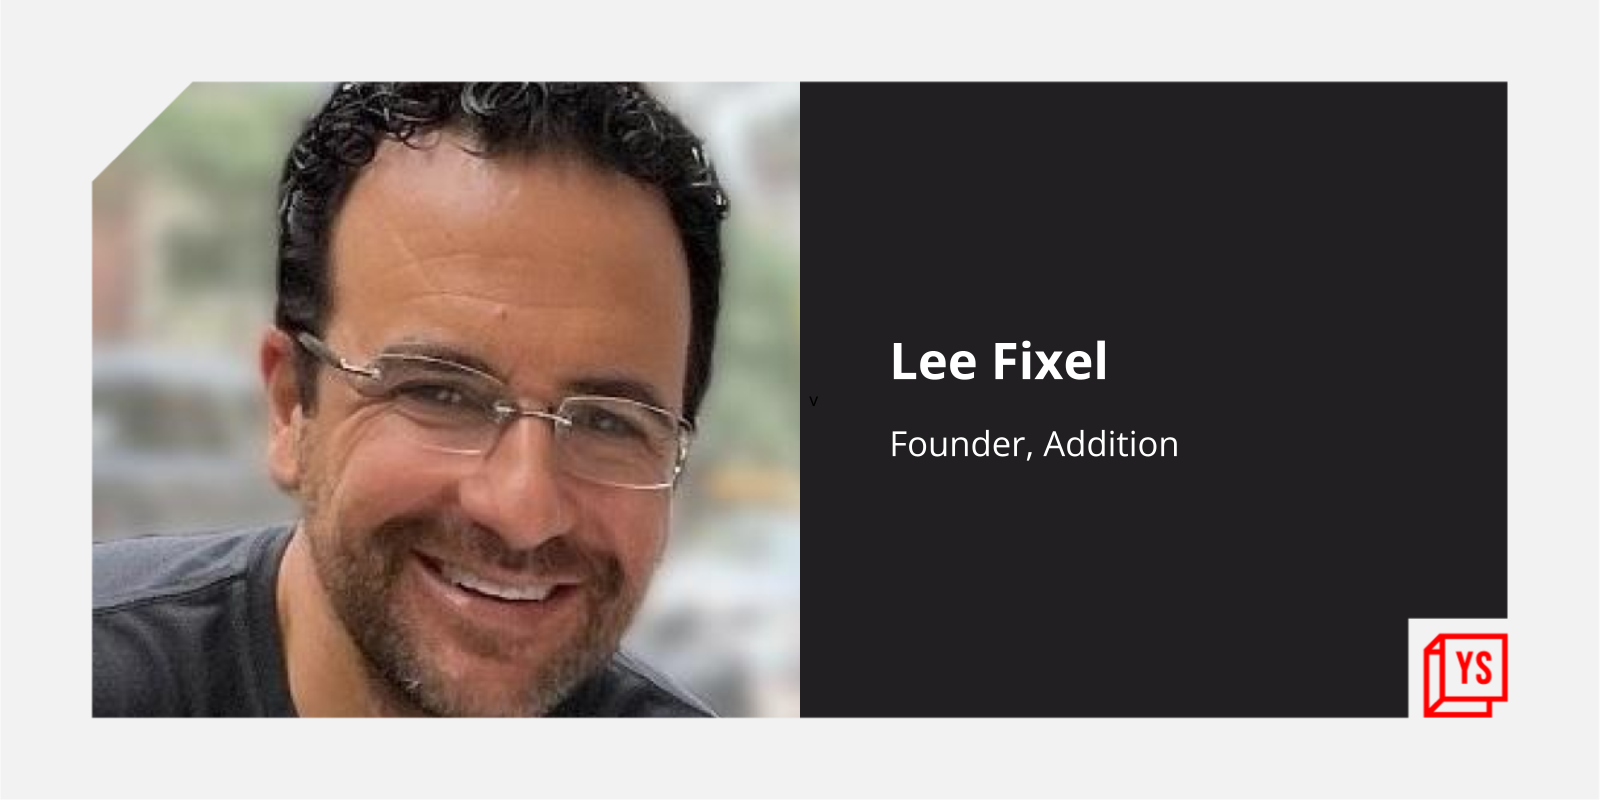 Lee Fixel's Addition launches new $1.5 billion fund